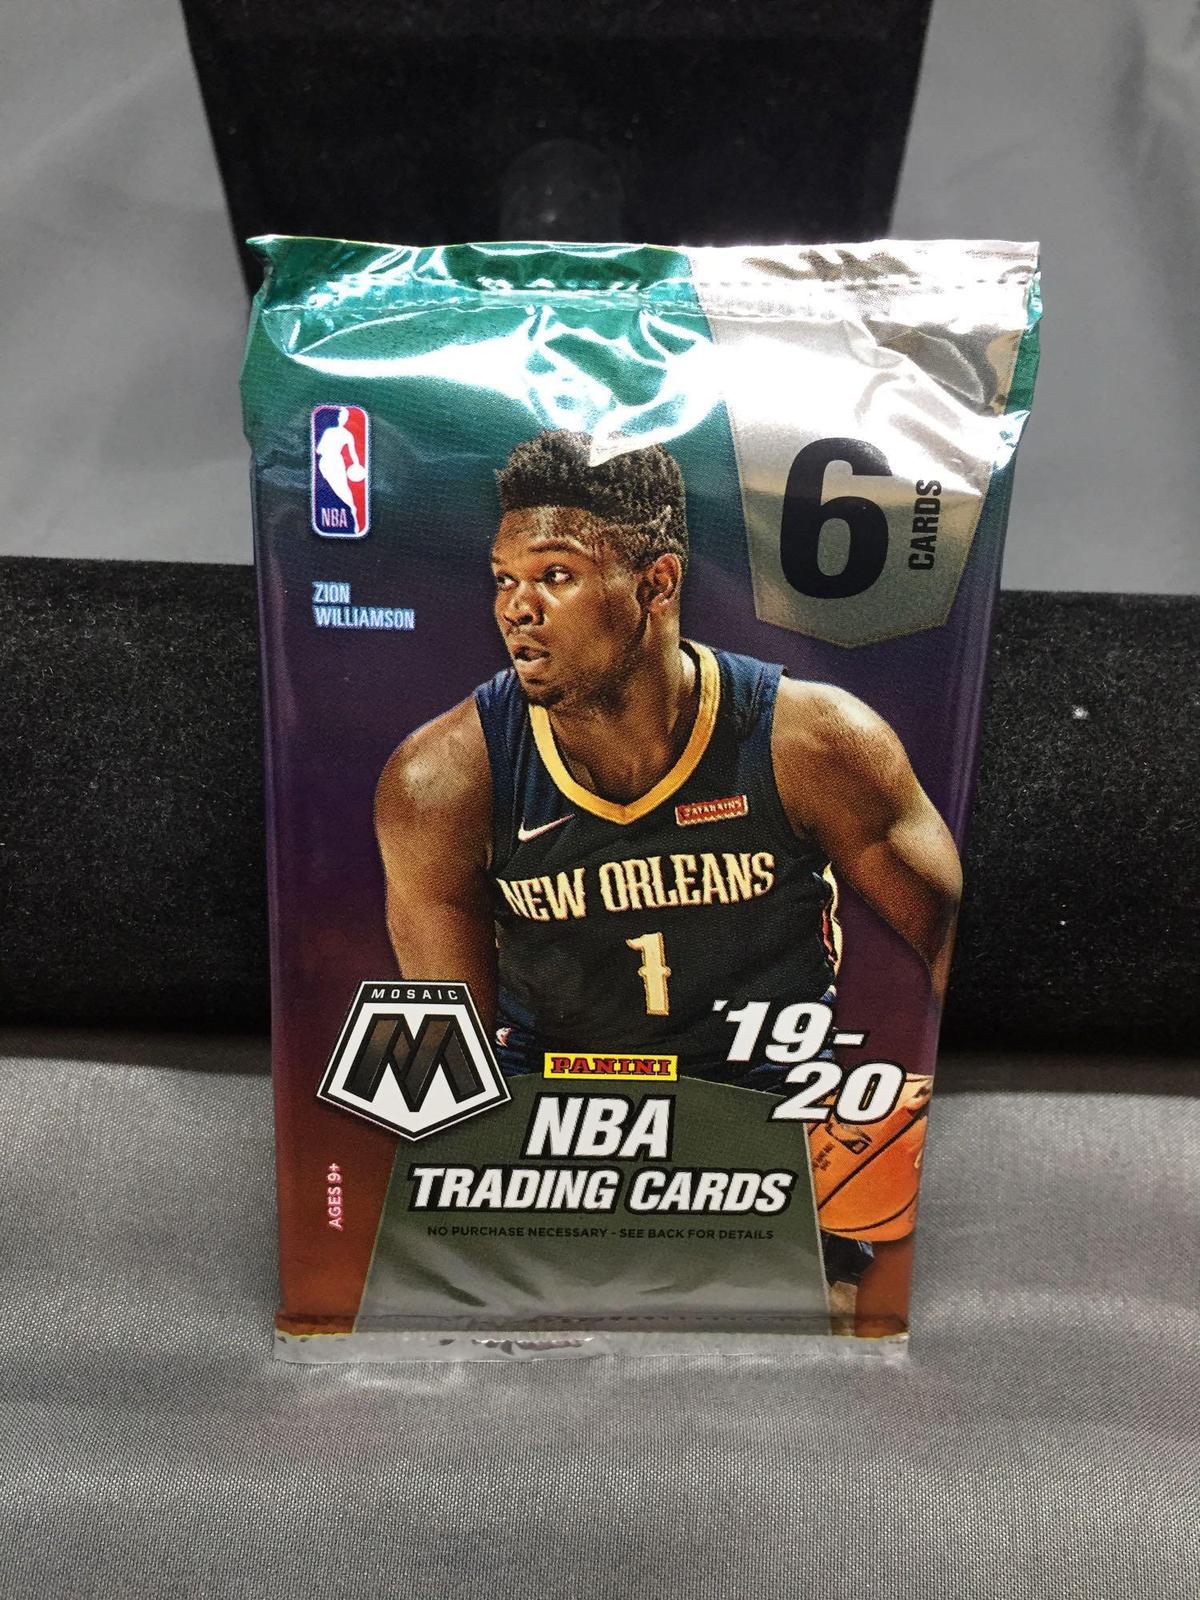 Factory Sealed 2019-20 Panini Mosaic Basketball 6 Card Pack - Zion Williamson Rookie?